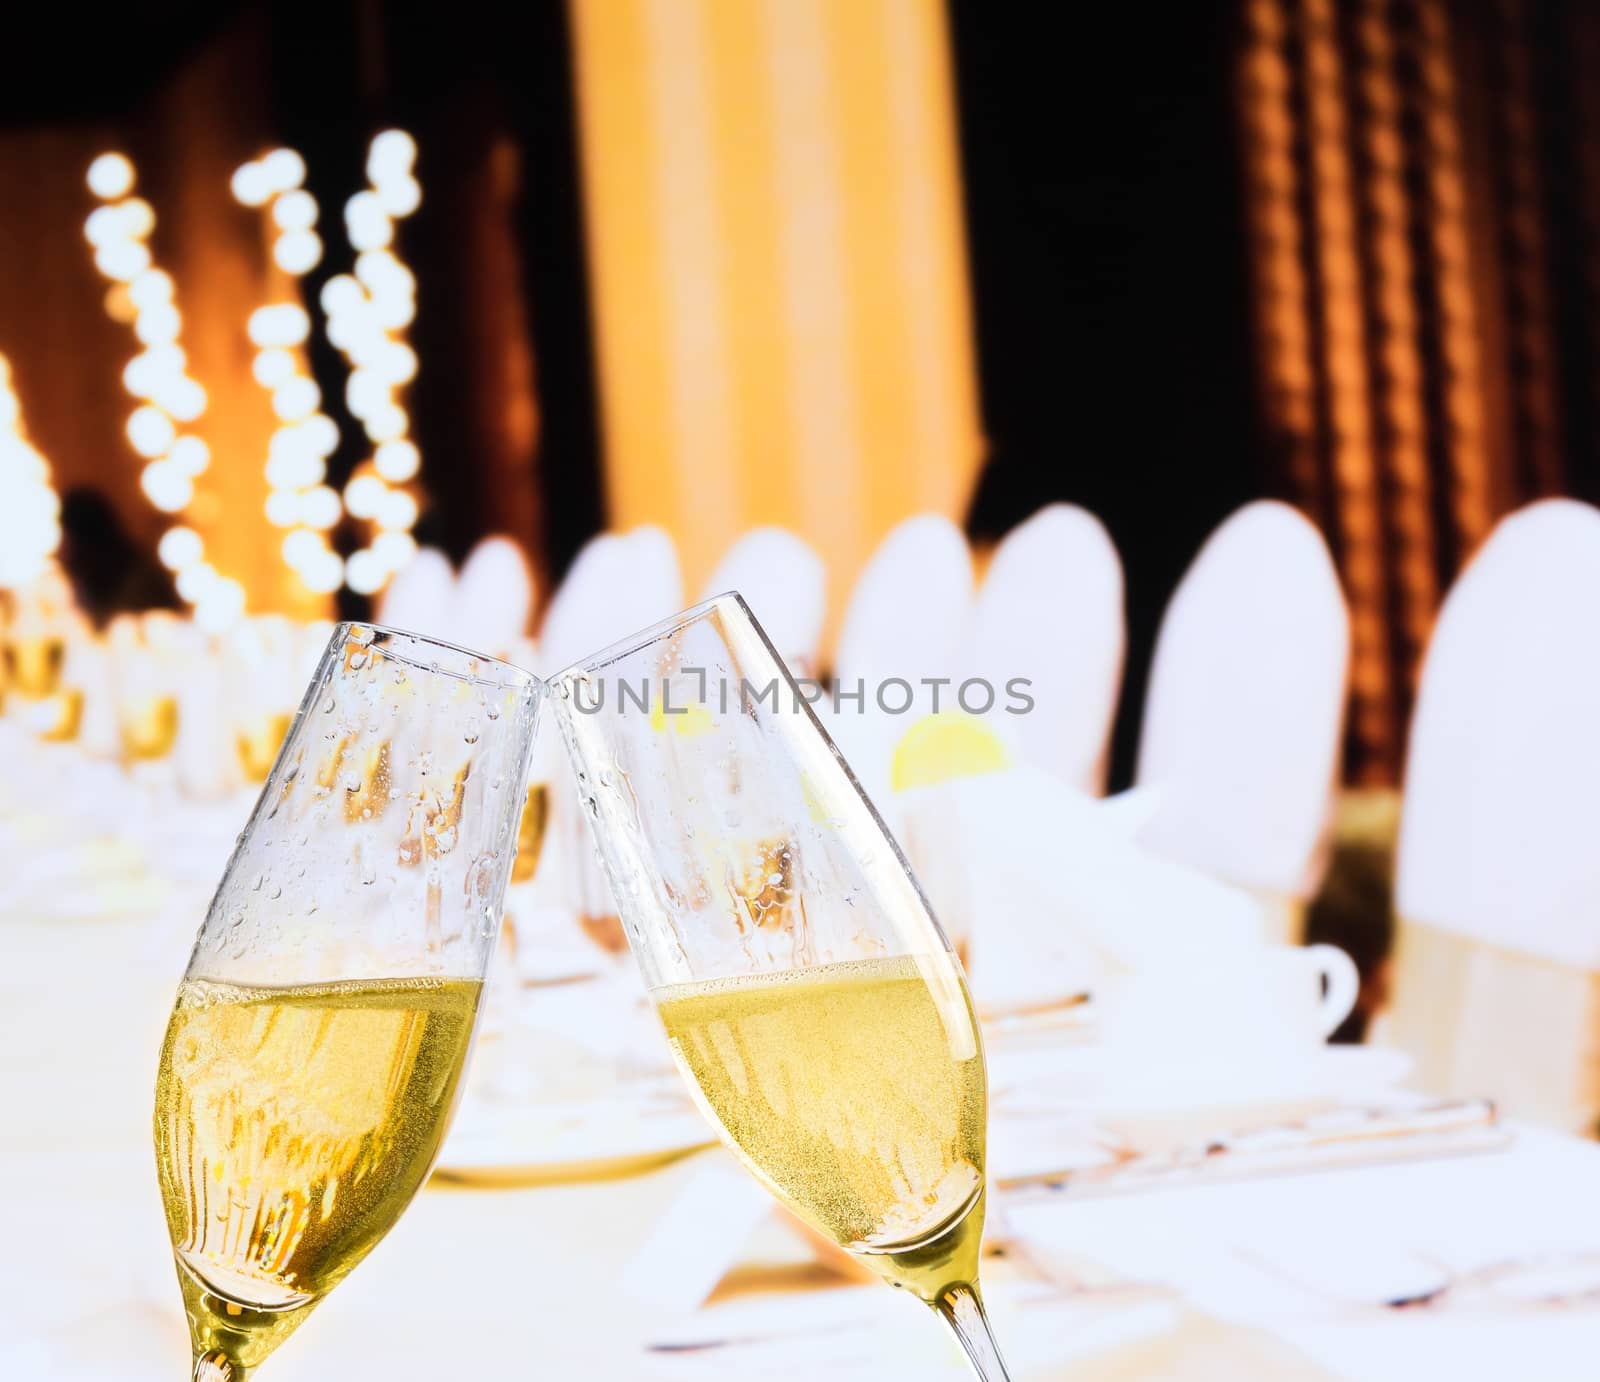 champagne flutes with golden bubbles on christmas table decoration background by donfiore